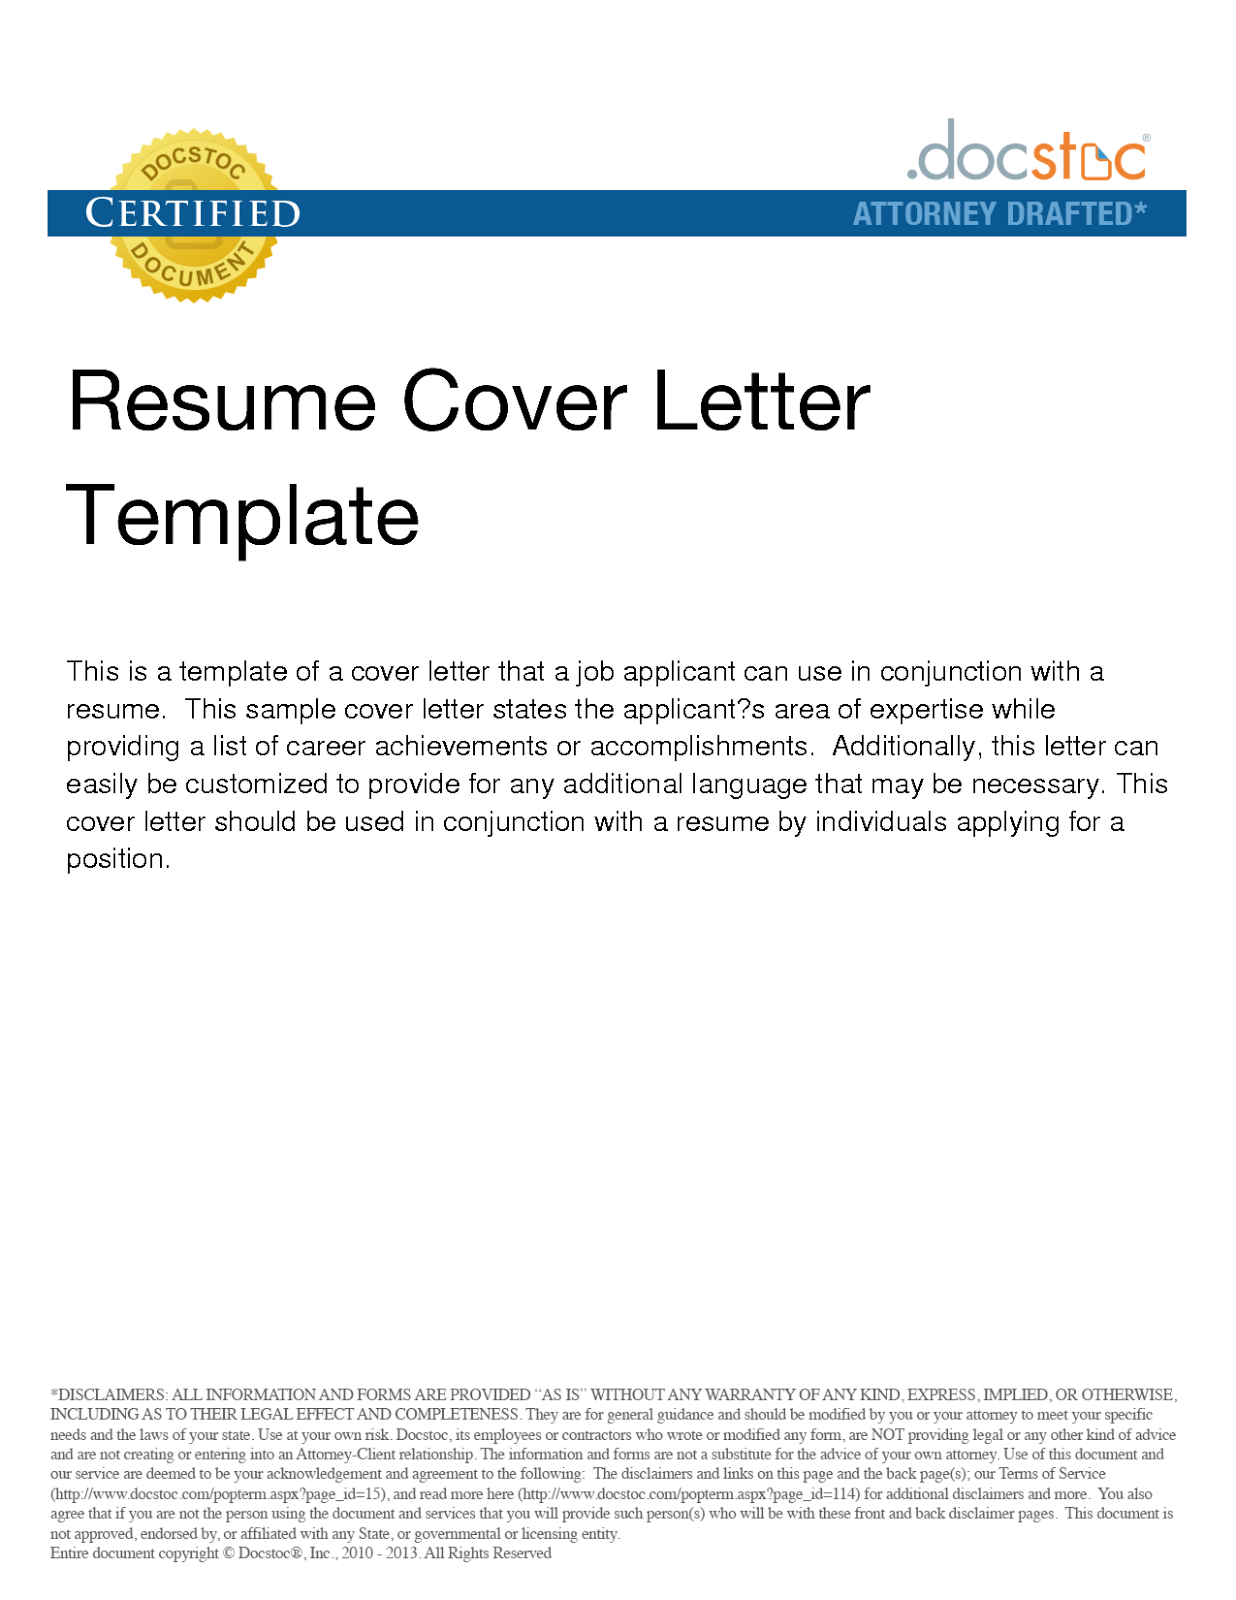 Sending cover letters and resume via email